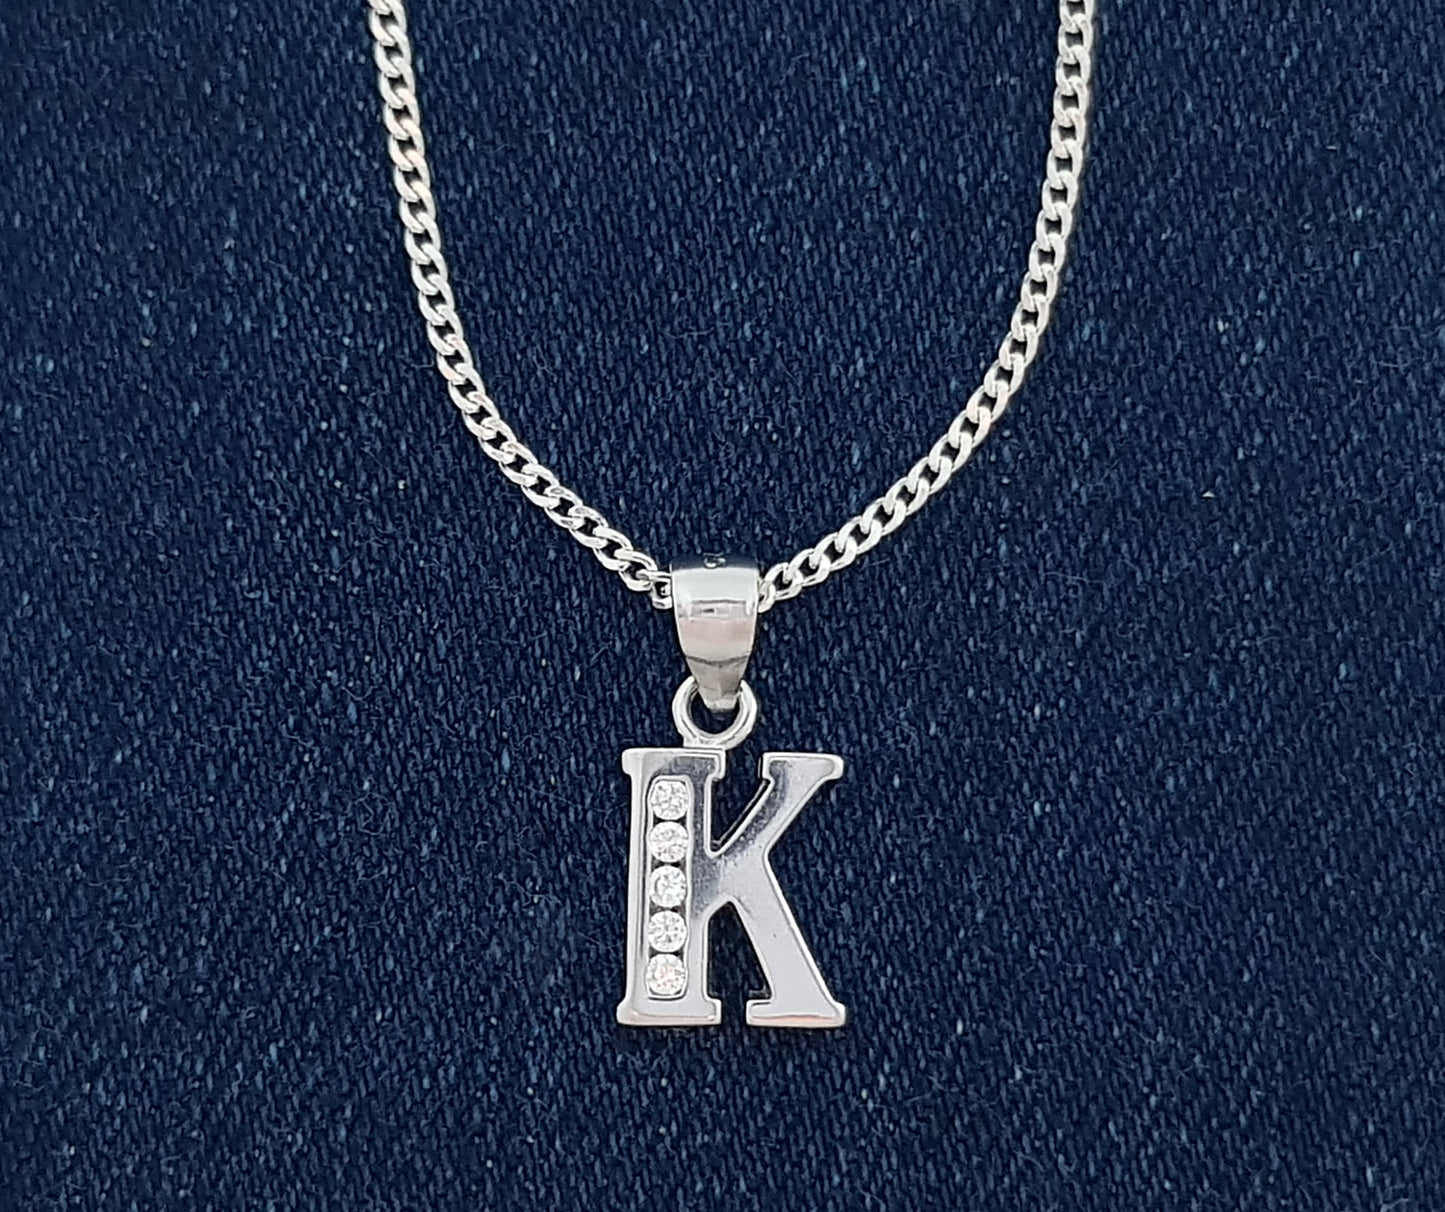 Sterling Silver Initial with Cubic Zirconia Stones- "K" Initial or Letter